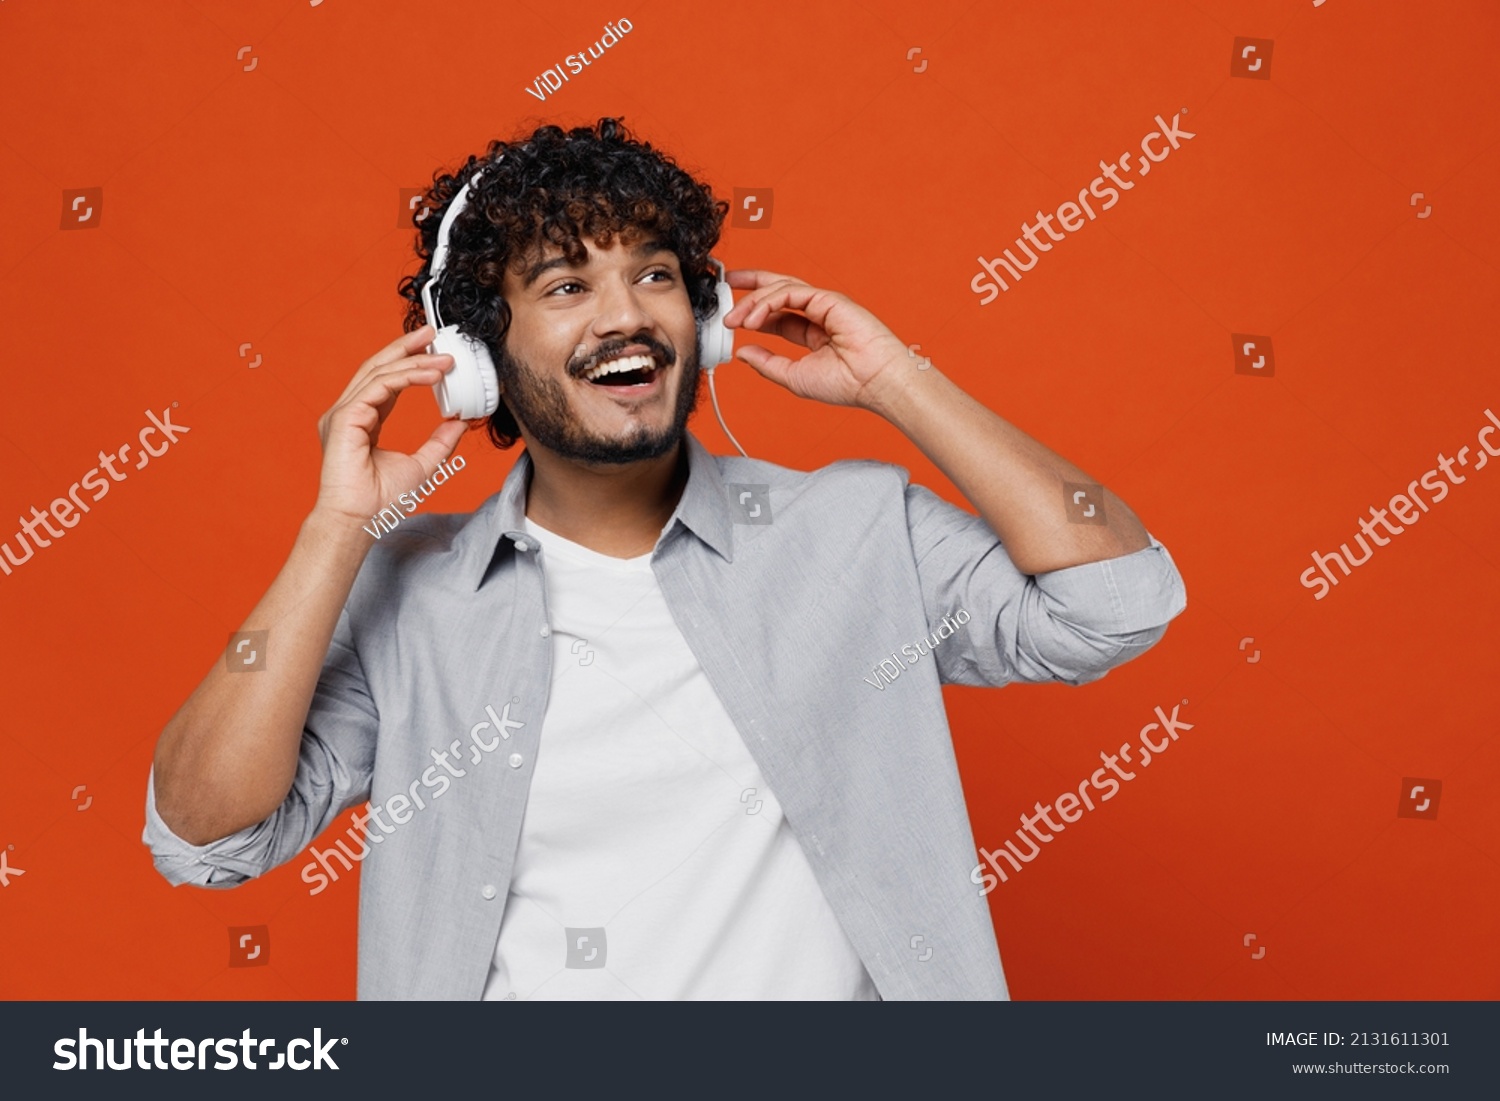 Cheerful exultant happy young bearded Indian man 20s years old wears blue shirt listen music in headphones dance have fun gesticulating hands relax isolated on plain orange background studio portrait #2131611301